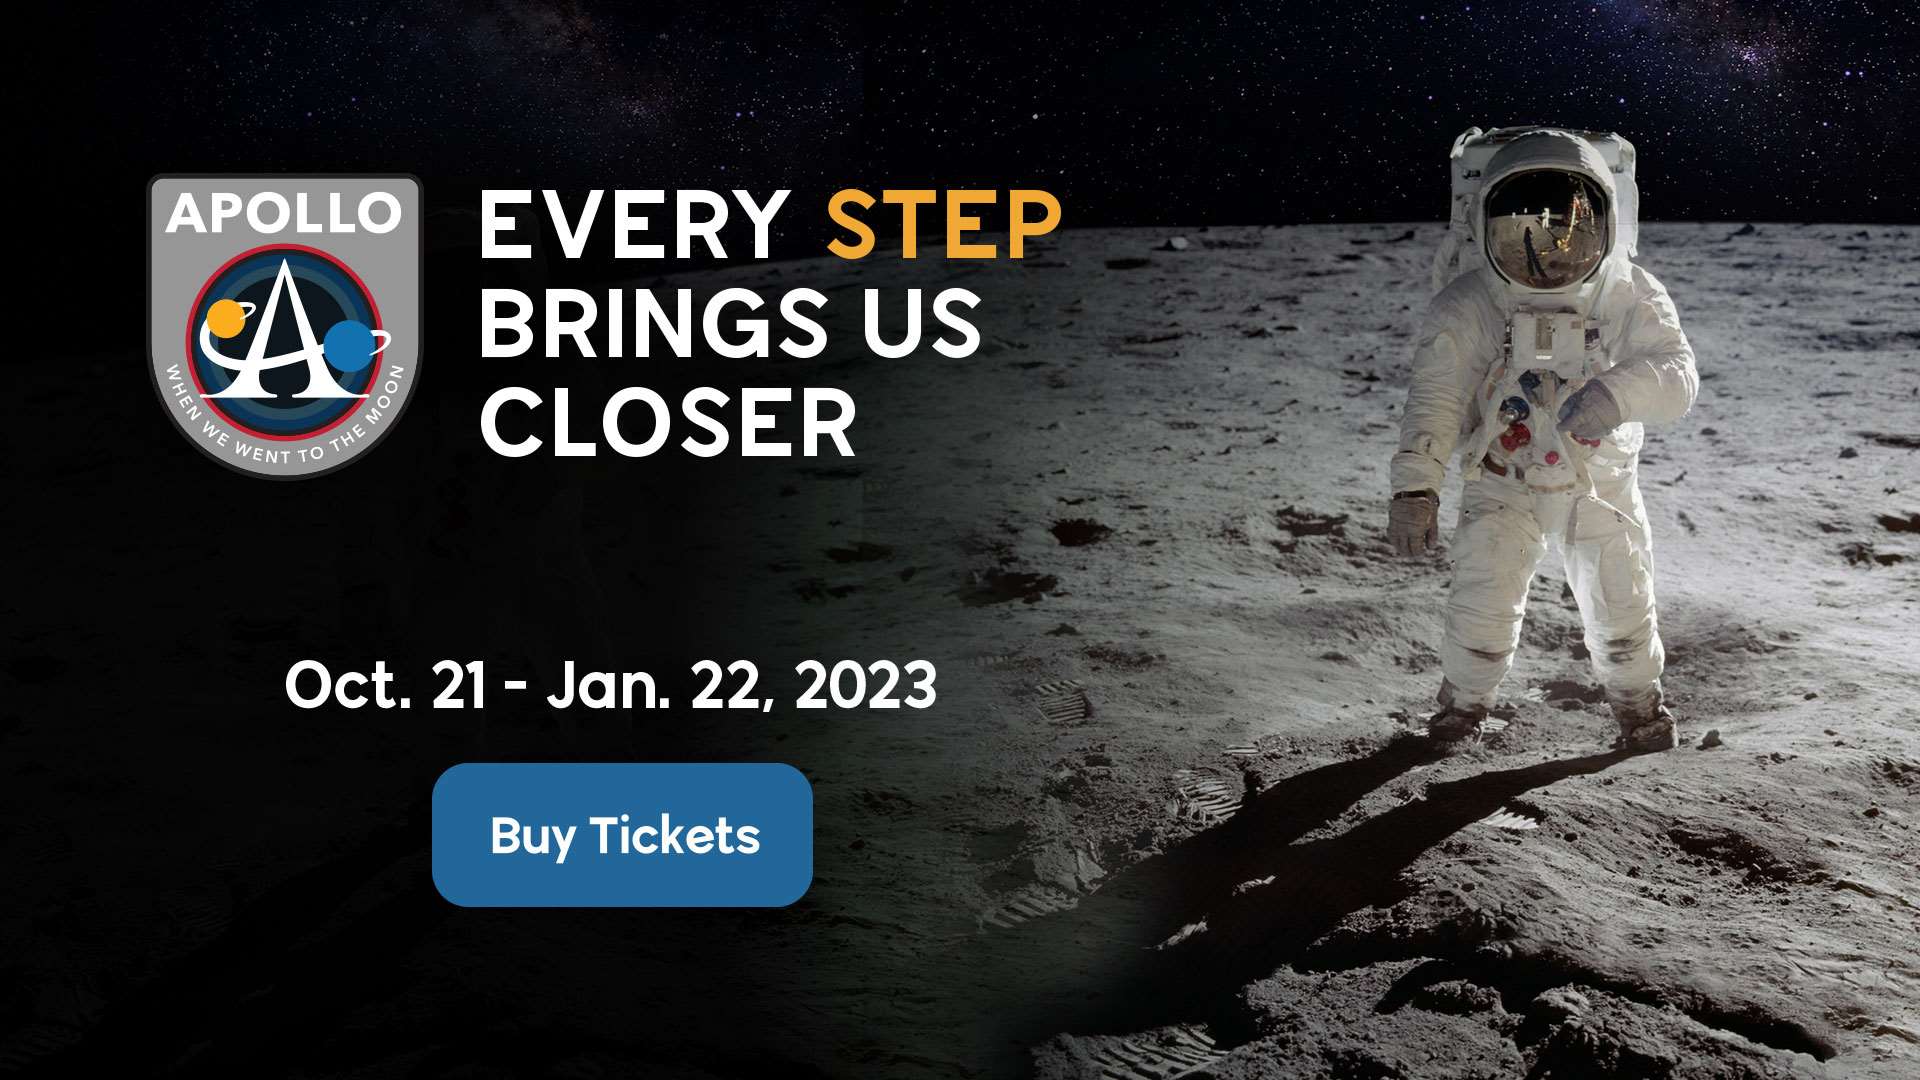 Buy Tickets to "Apollo: When We Went to the Moon"